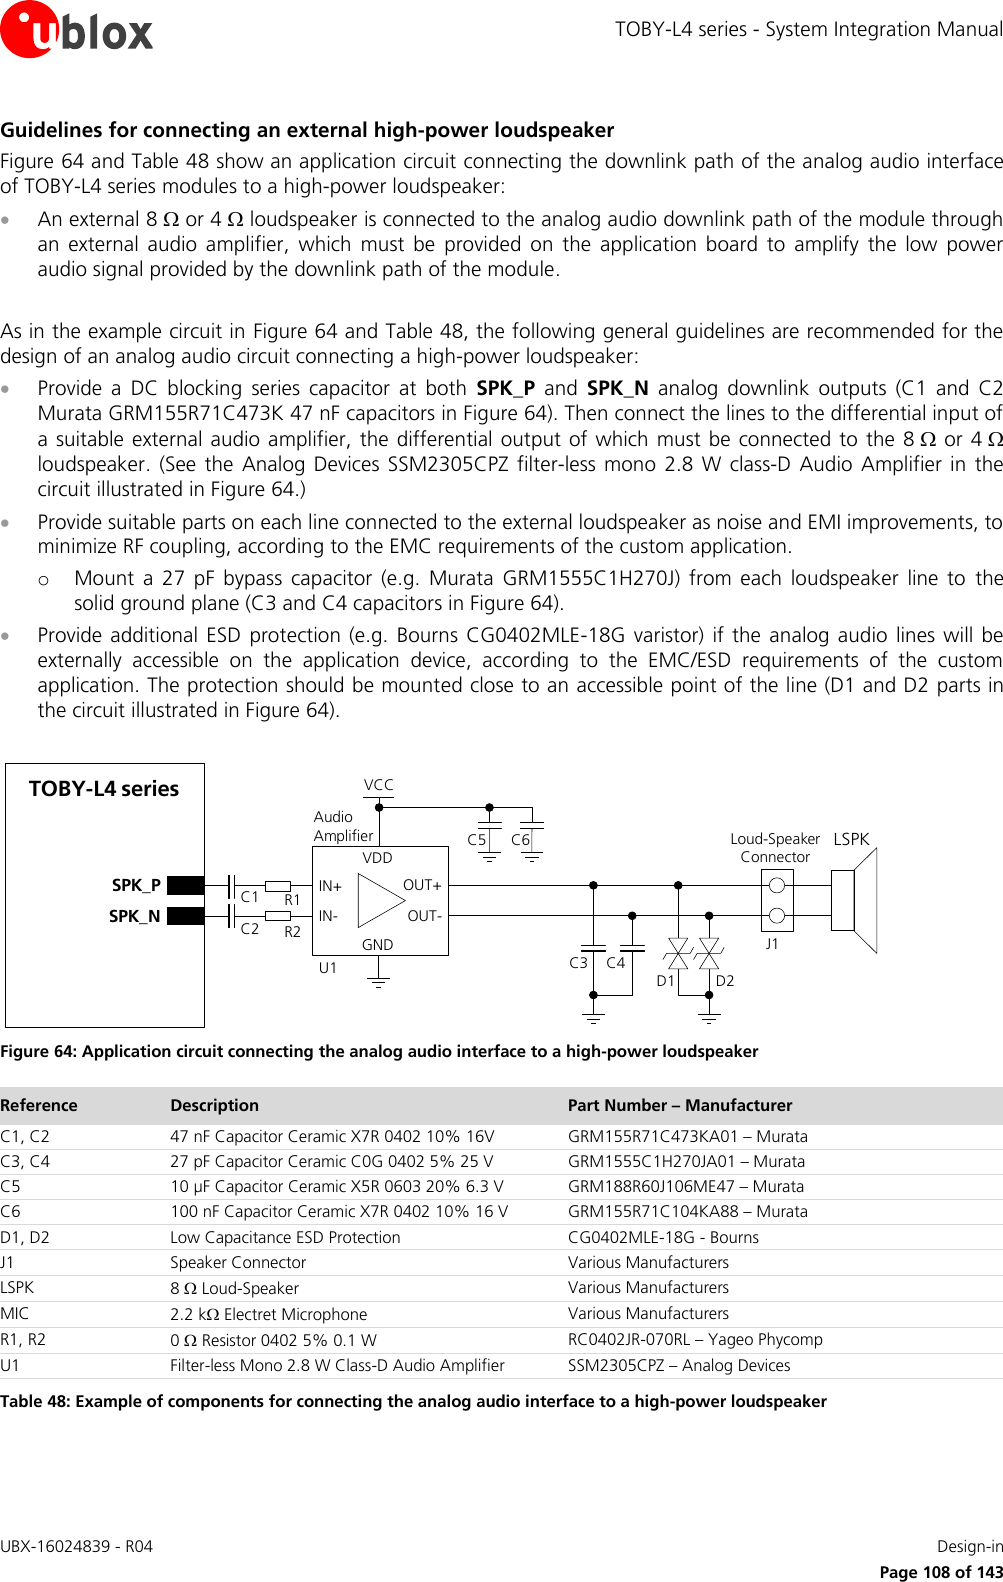 TOBY-L4 series - System Integration Manual UBX-16024839 - R04    Design-in     Page 108 of 143 Guidelines for connecting an external high-power loudspeaker Figure 64 and Table 48 show an application circuit connecting the downlink path of the analog audio interface of TOBY-L4 series modules to a high-power loudspeaker:  An external 8  or 4  loudspeaker is connected to the analog audio downlink path of the module through an  external  audio  amplifier,  which  must  be  provided  on  the  application  board  to  amplify  the  low  power audio signal provided by the downlink path of the module.  As in the example circuit in Figure 64 and Table 48, the following general guidelines are recommended for the design of an analog audio circuit connecting a high-power loudspeaker:  Provide  a  DC  blocking  series  capacitor  at  both  SPK_P  and  SPK_N  analog  downlink  outputs  (C1  and  C2 Murata GRM155R71C473K 47 nF capacitors in Figure 64). Then connect the lines to the differential input of a suitable  external audio amplifier, the  differential output  of  which must be  connected to  the 8  or 4  loudspeaker.  (See  the  Analog  Devices SSM2305CPZ  filter-less  mono  2.8  W  class-D  Audio  Amplifier  in  the circuit illustrated in Figure 64.)  Provide suitable parts on each line connected to the external loudspeaker as noise and EMI improvements, to minimize RF coupling, according to the EMC requirements of the custom application. o Mount  a  27  pF  bypass  capacitor  (e.g.  Murata  GRM1555C1H270J)  from  each  loudspeaker  line  to  the solid ground plane (C3 and C4 capacitors in Figure 64).  Provide  additional  ESD  protection  (e.g.  Bourns CG0402MLE-18G  varistor)  if  the analog audio  lines  will be externally  accessible  on  the  application  device,  according  to  the  EMC/ESD  requirements  of  the  custom application. The protection should be mounted close to an accessible point of the line (D1 and D2 parts in the circuit illustrated in Figure 64).  TOBY-L4 seriesSPK_PSPK_NC3 C4LSPKLoud-Speaker ConnectorJ1OUT+IN+GNDU1OUT-IN-C1C2R1R2VDDC6C5Audio AmplifierVCCD1 D2 Figure 64: Application circuit connecting the analog audio interface to a high-power loudspeaker Reference Description Part Number – Manufacturer C1, C2 47 nF Capacitor Ceramic X7R 0402 10% 16V GRM155R71C473KA01 – Murata C3, C4 27 pF Capacitor Ceramic C0G 0402 5% 25 V  GRM1555C1H270JA01 – Murata C5 10 µF Capacitor Ceramic X5R 0603 20% 6.3 V GRM188R60J106ME47 – Murata C6 100 nF Capacitor Ceramic X7R 0402 10% 16 V GRM155R71C104KA88 – Murata D1, D2 Low Capacitance ESD Protection CG0402MLE-18G - Bourns J1 Speaker Connector Various Manufacturers  LSPK 8  Loud-Speaker Various Manufacturers MIC 2.2 k Electret Microphone Various Manufacturers R1, R2 0  Resistor 0402 5% 0.1 W  RC0402JR-070RL – Yageo Phycomp U1 Filter-less Mono 2.8 W Class-D Audio Amplifier SSM2305CPZ – Analog Devices Table 48: Example of components for connecting the analog audio interface to a high-power loudspeaker  